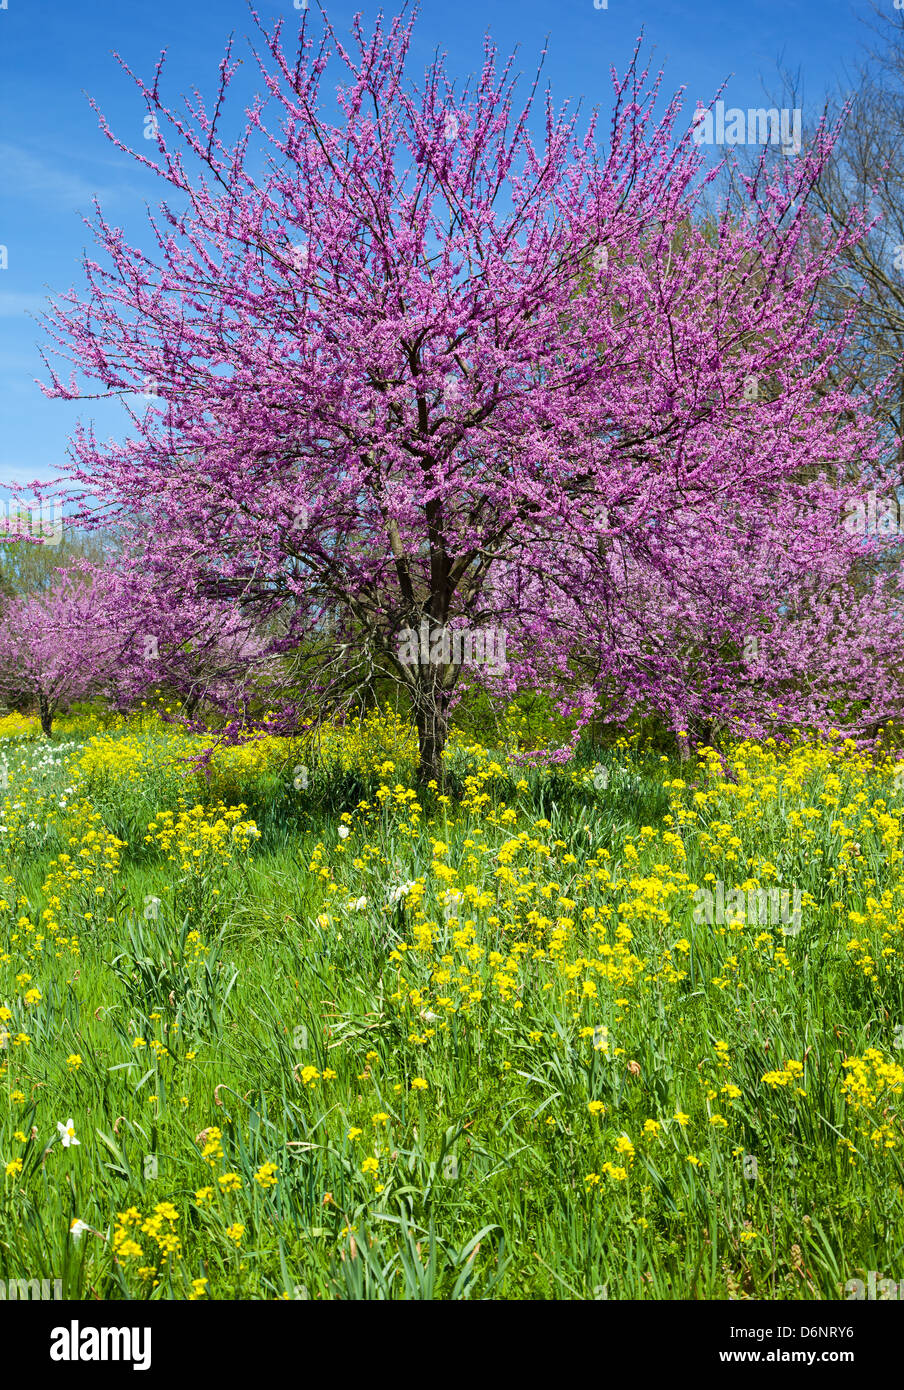 Eastern Redbud Tree (Cercis canadensis) with Wild Mustard (Brassicaceae) Stock Photo